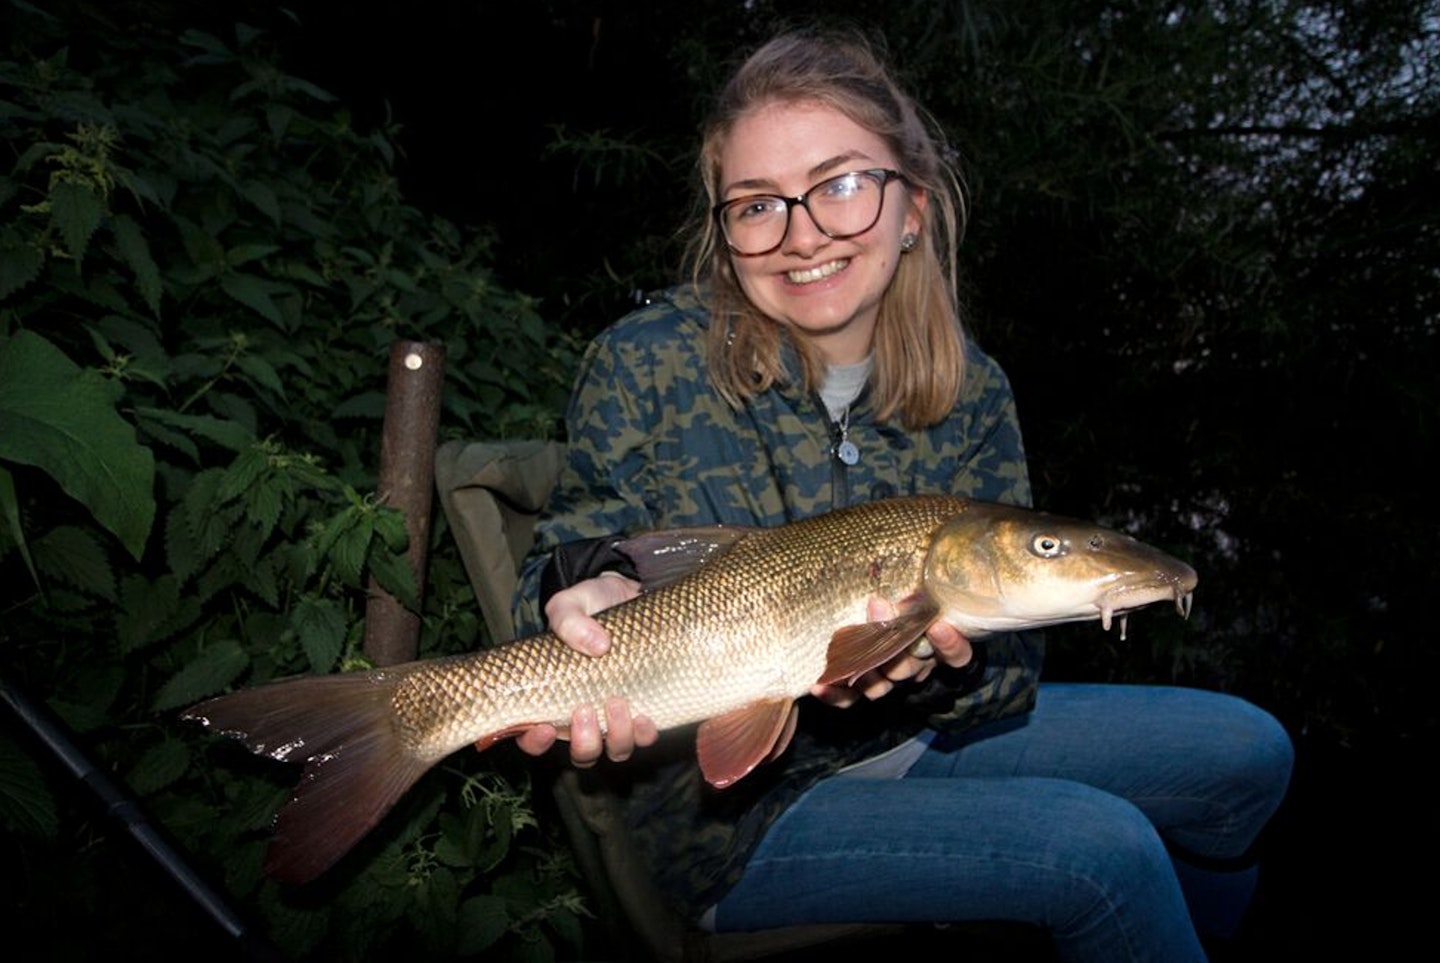 Helen Coyle gets to grips with a barbel. It’s hoped that events aimed specifically at women will draw more anglers like Helen into our sport